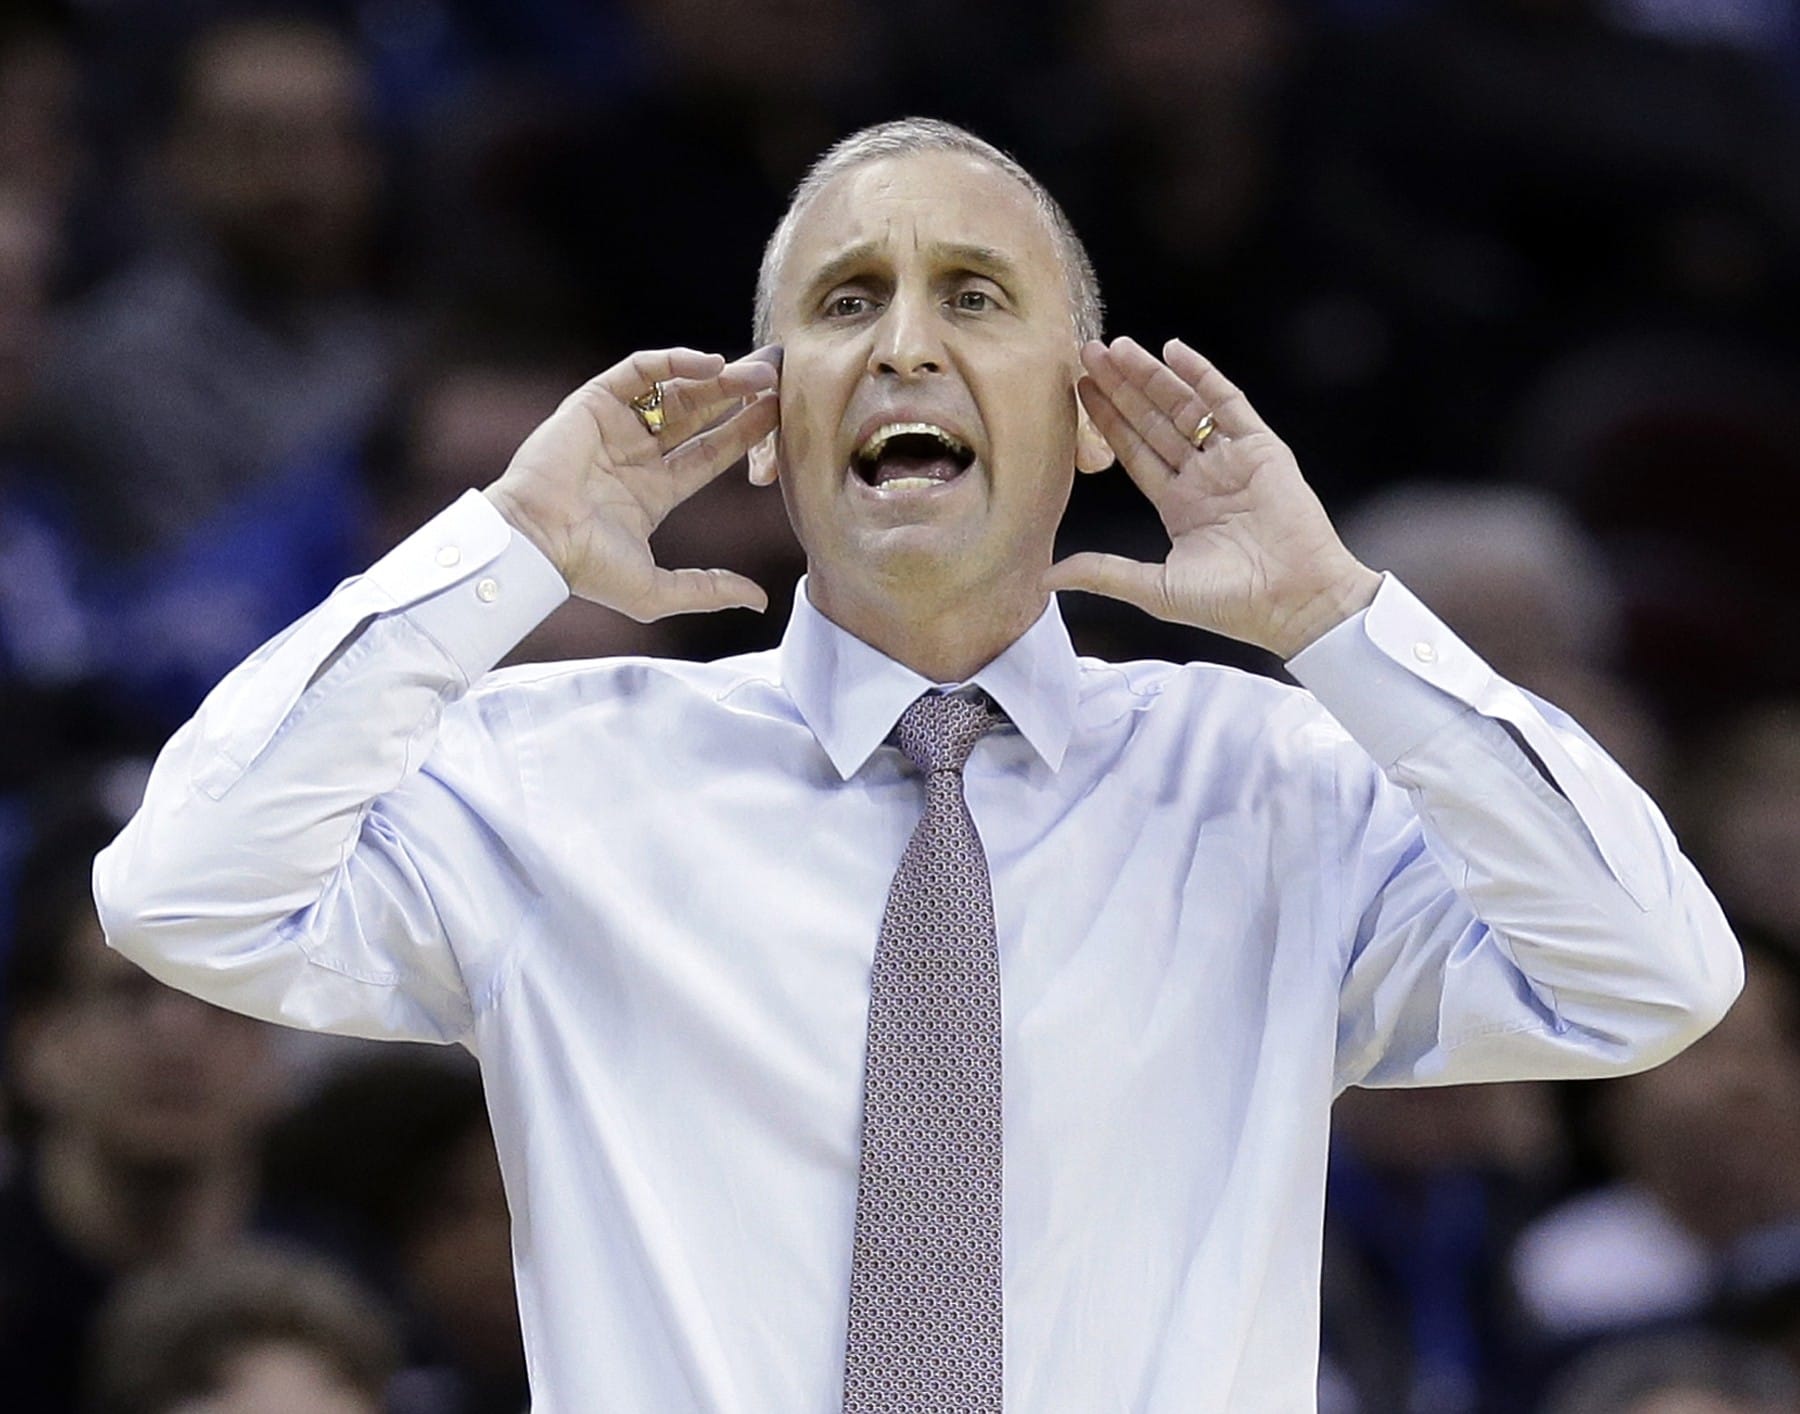 Arizona State has hired Bobby Hurley as its basketball coach. The 43-year-old Hurley spent the past two years as coach at Buffalo, where he led the Bulls to 23 wins and an NCAA Tournament berth this past season. He replaces Herb Sendek, who was fired March 24 after nine seasons.